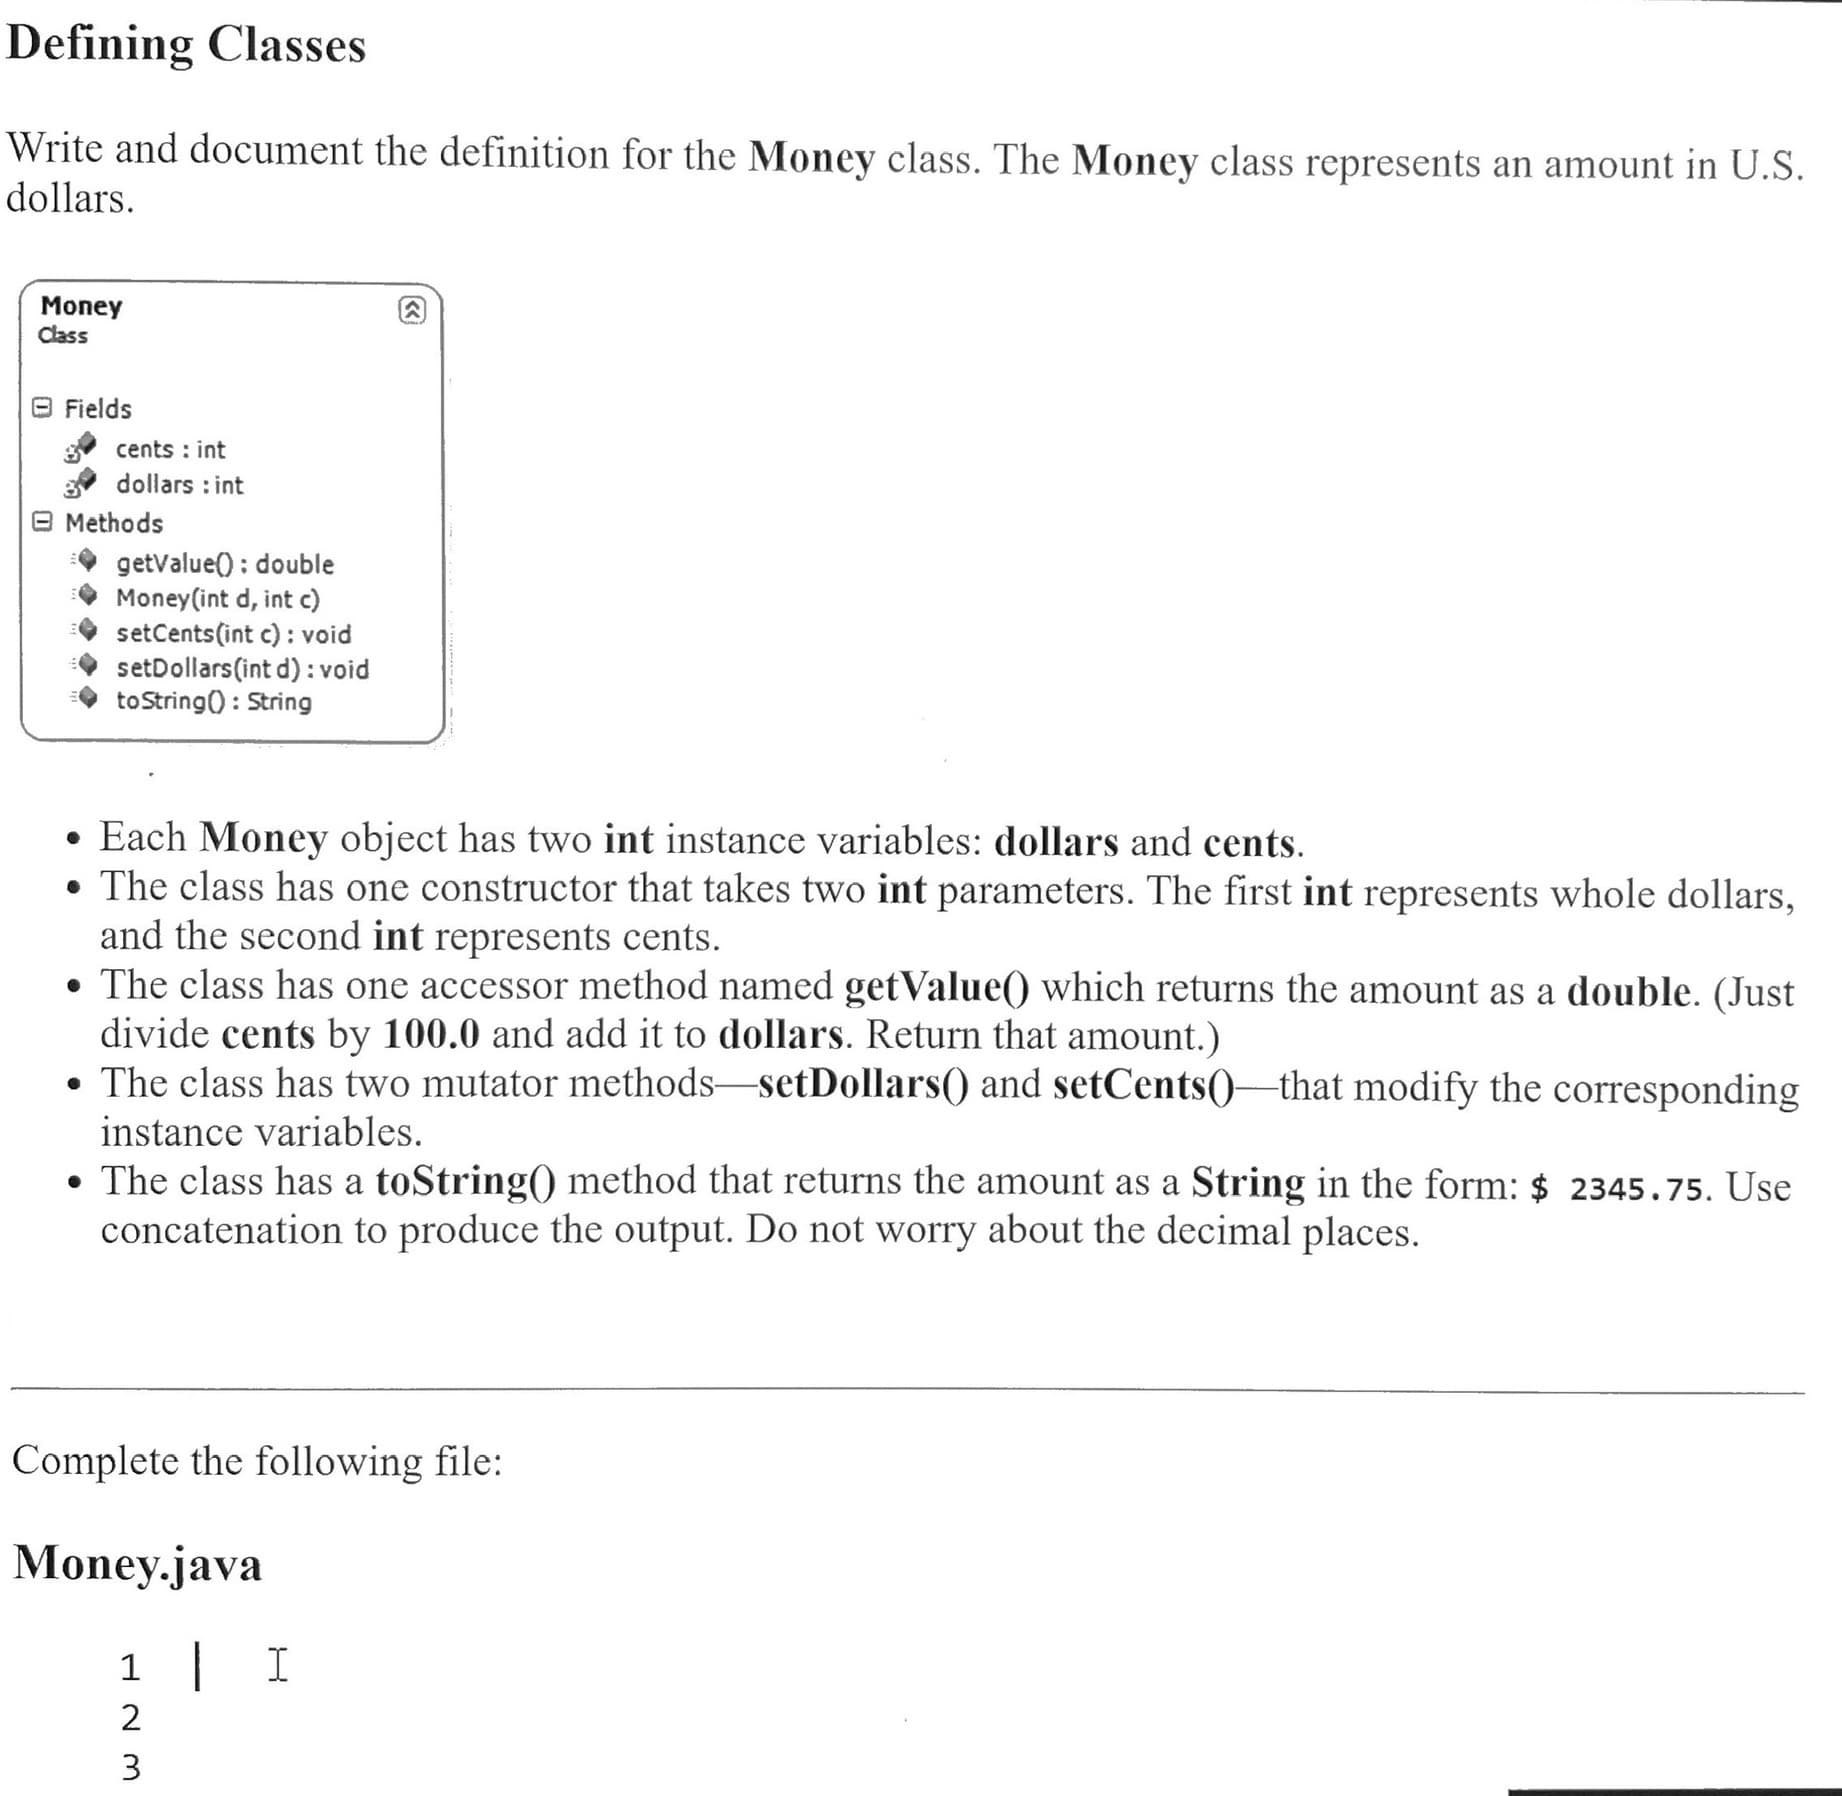 Defining Classes
Write and document the definition for the Money class. The Money class represents an amount in U.S.
dollars.
Money
Class
e Fields
cents : int
dollars : int
e Methods
getValue() : double
Money(int d, int c)
setCents(int c) : void
setDollars(int d) : void
toString() : String
• Each Money object has two int instance variables: dollars and cents.
• The class has one constructor that takes two int parameters. The first int represents whole dollars,
and the second int represents cents.
• The class has one accessor method named getValue() which returns the amount as a double. (Just
divide cents by 100.0 and add it to dollars. Return that amount.)
• The class has two mutator methods-setDollars() and setCents()–that modify the corresponding
instance variables.
• The class has a toString() method that returns the amount as a String in the form: $ 2345.75. Use
concatenation to produce the output. Do not worry about the decimal places.
